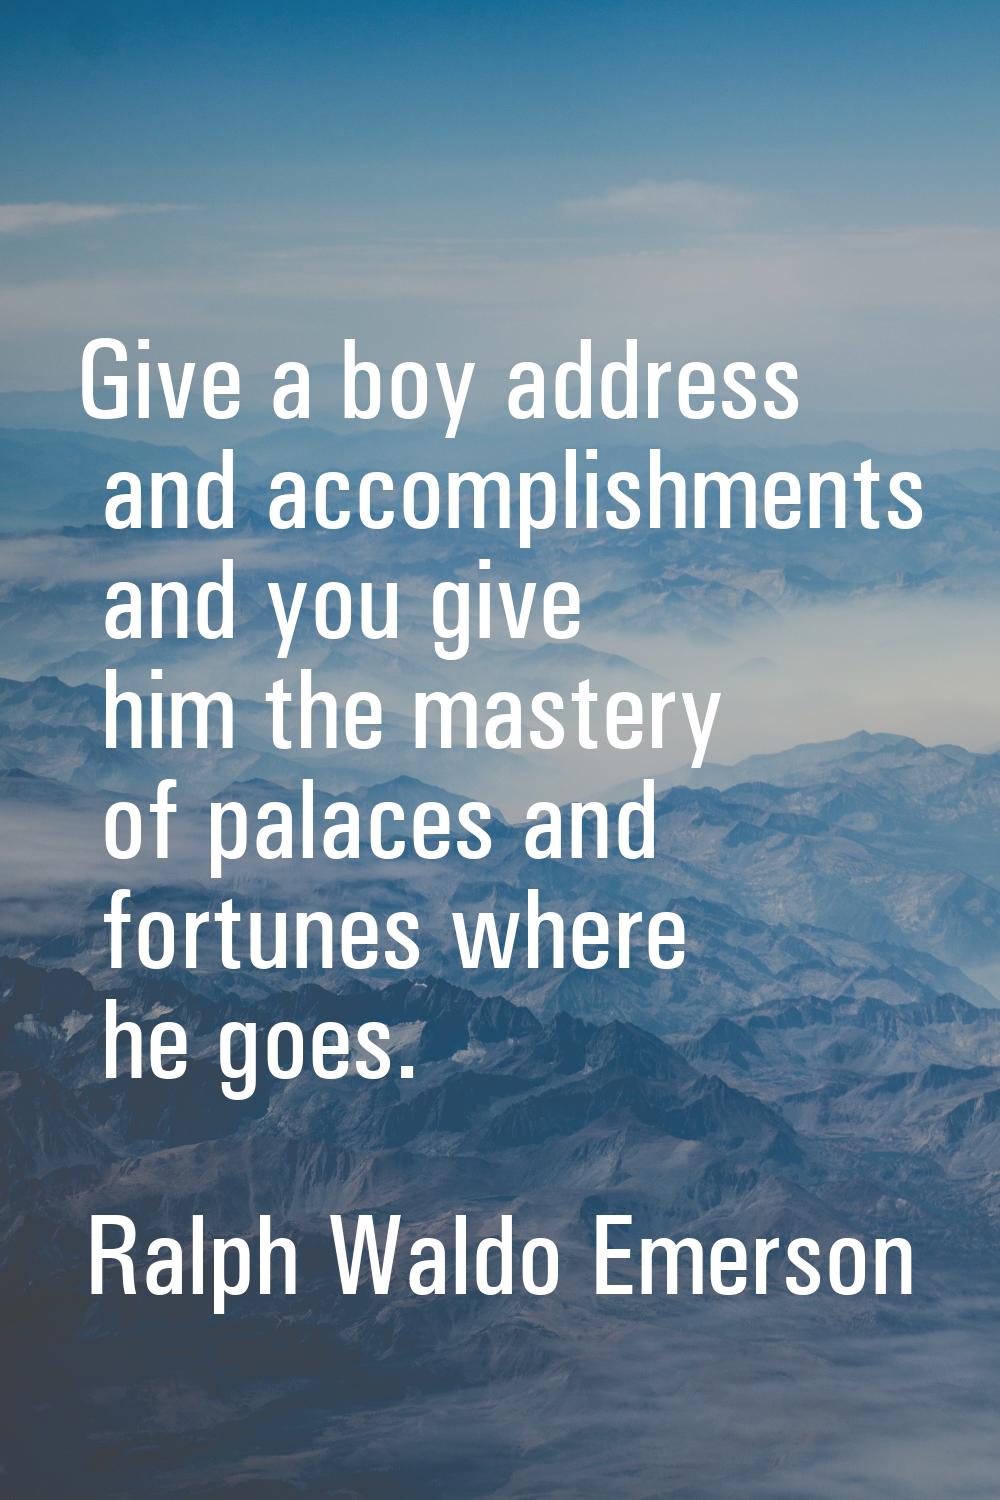 Give a boy address and accomplishments and you give him the mastery of palaces and fortunes where h